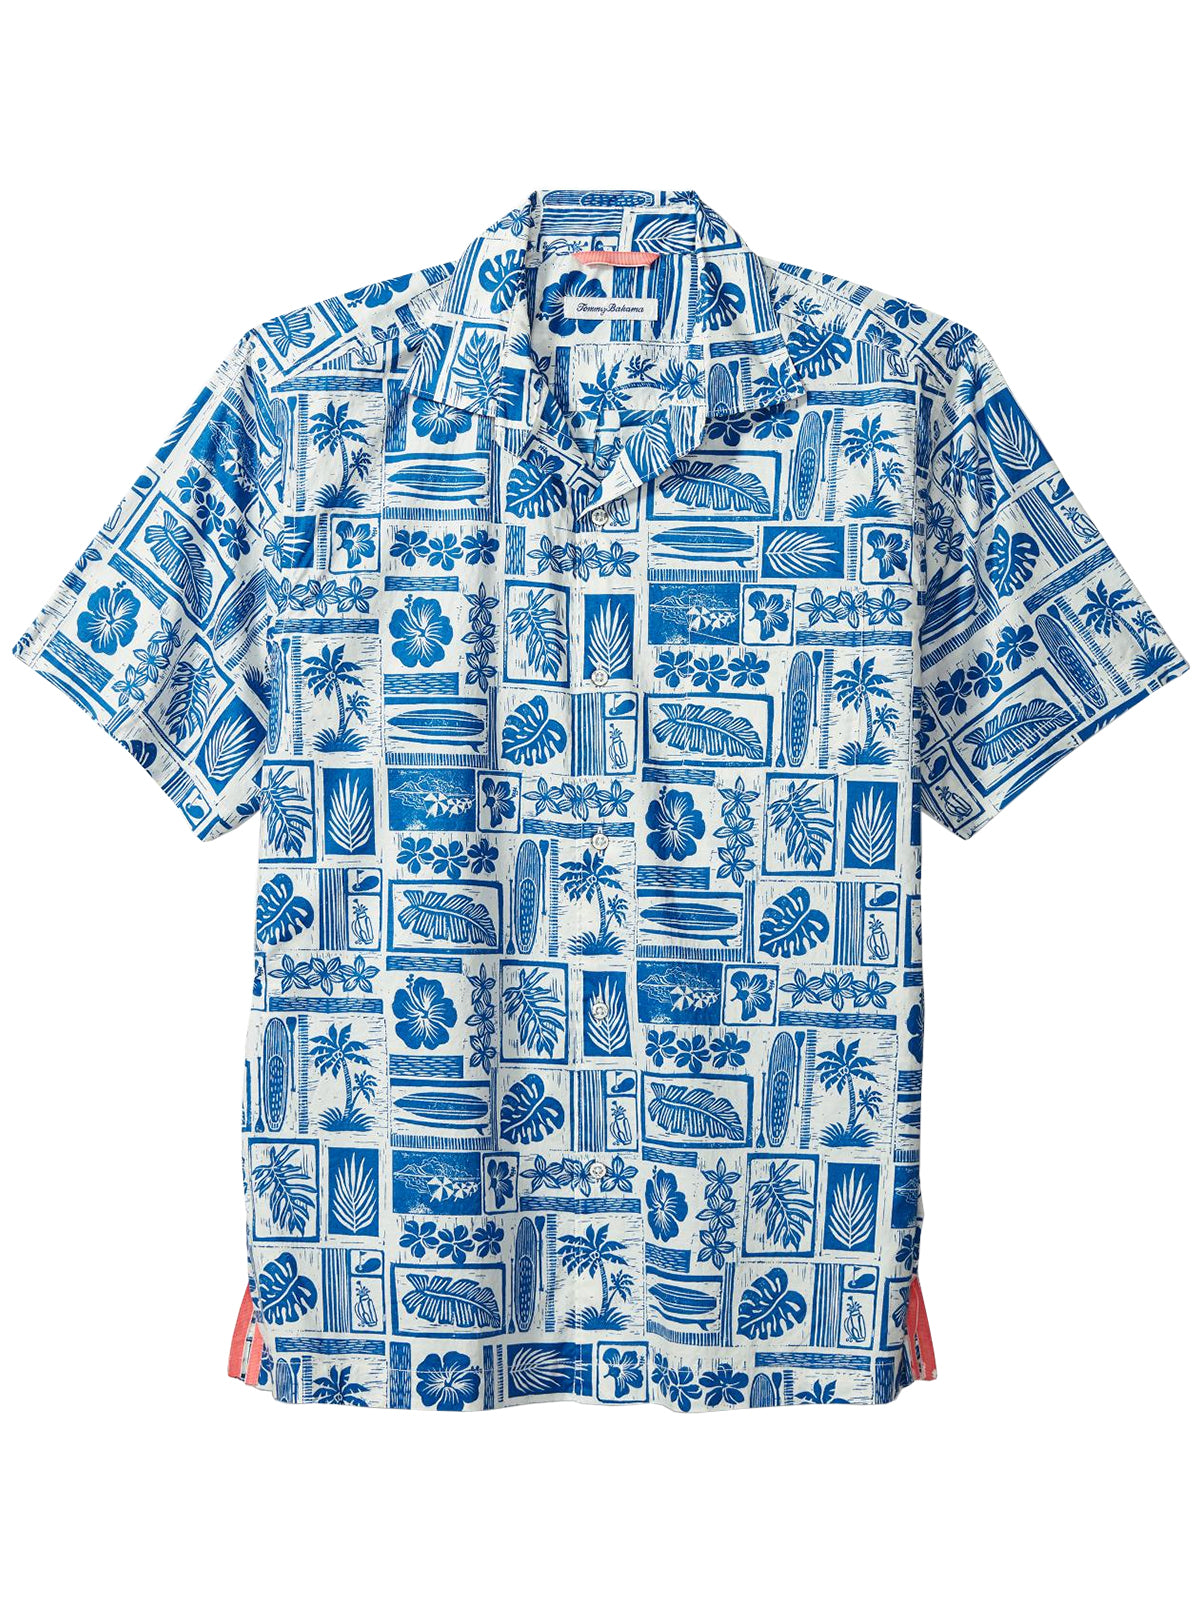 Tommy Bahama 100% Cotton Lido Beach Camp Shirts in Blue